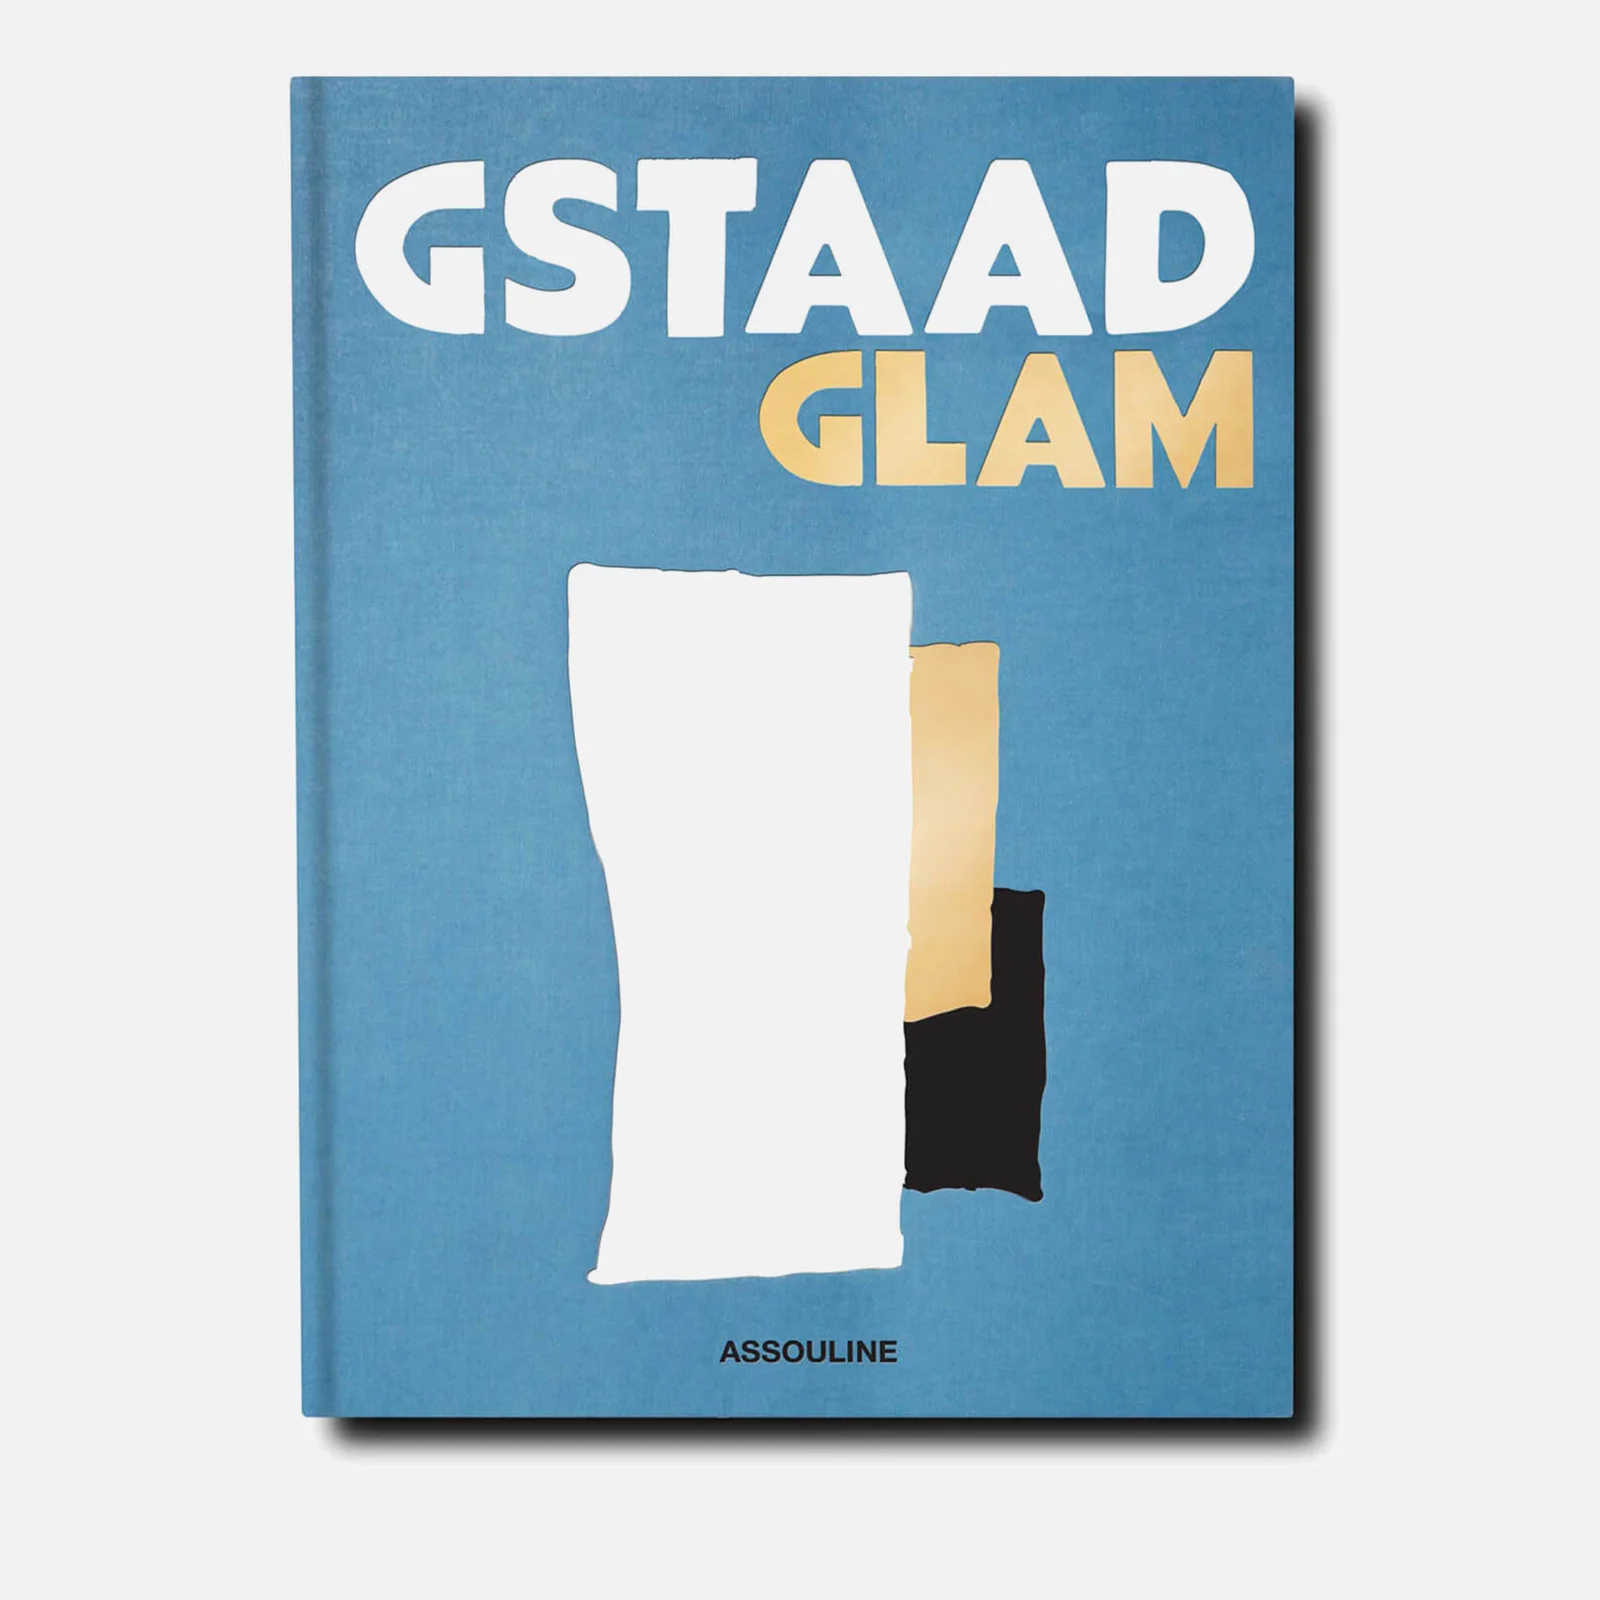 Assouline: Gstaad Glam Image 1